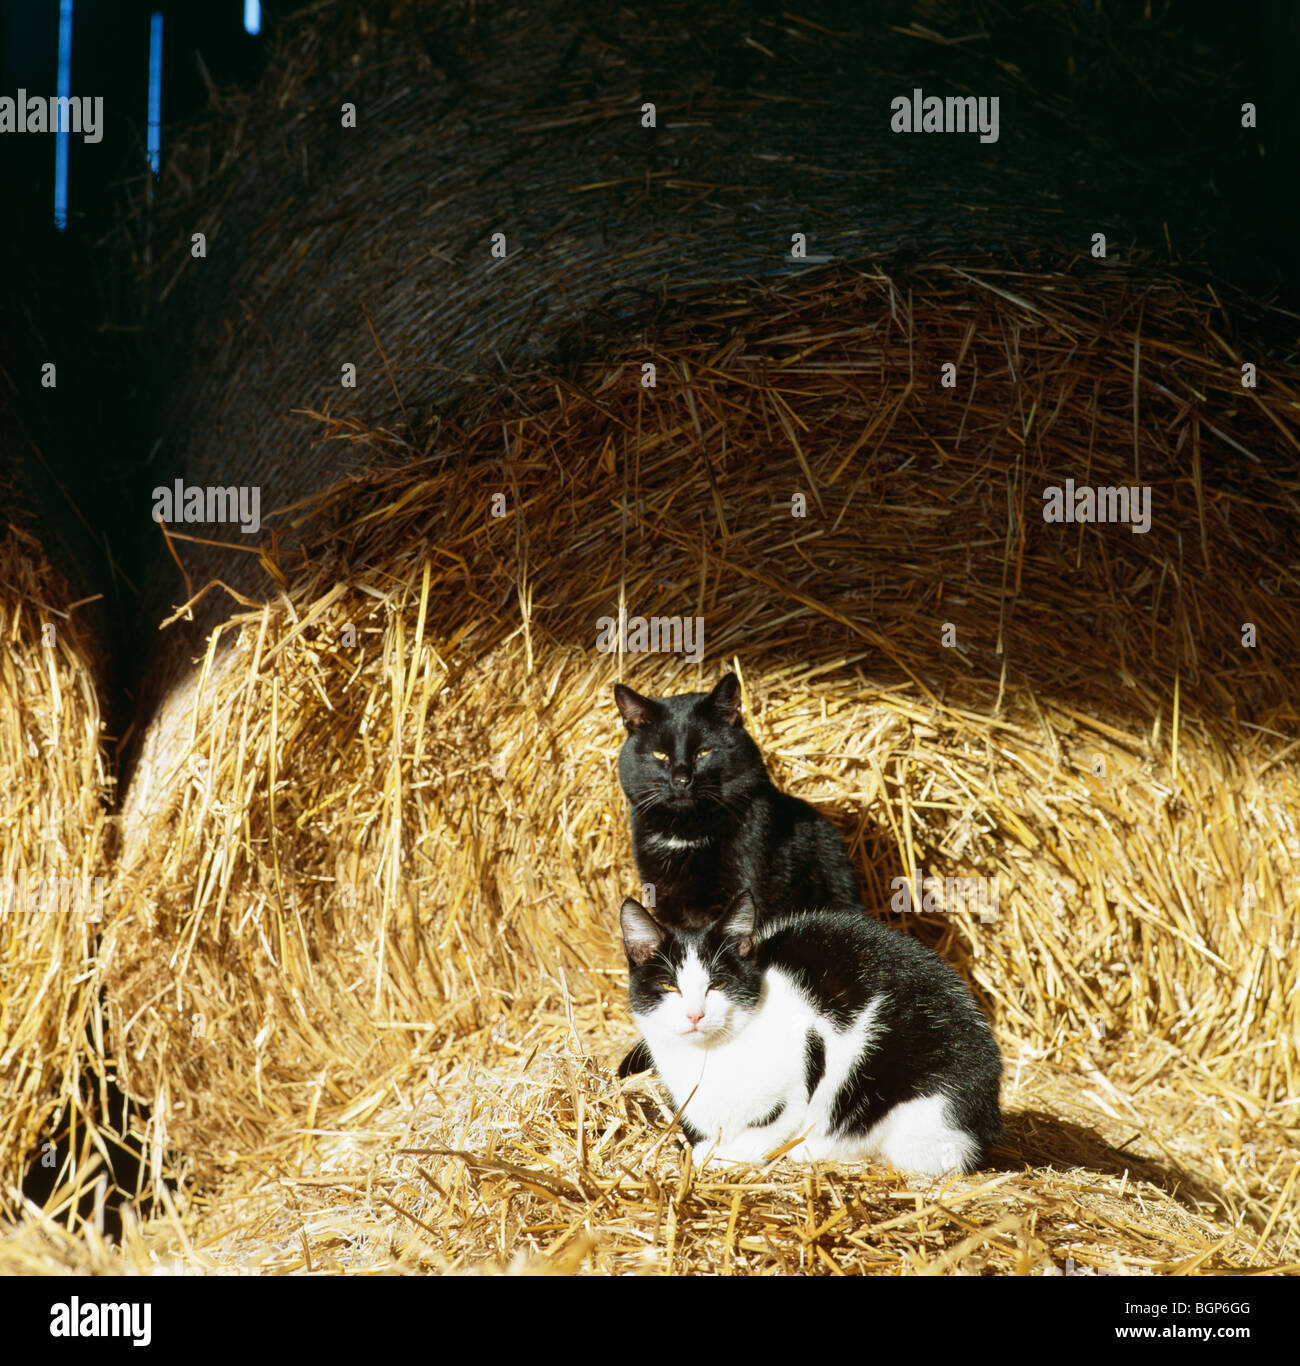 Cats at a farm, Sweden. Stock Photo